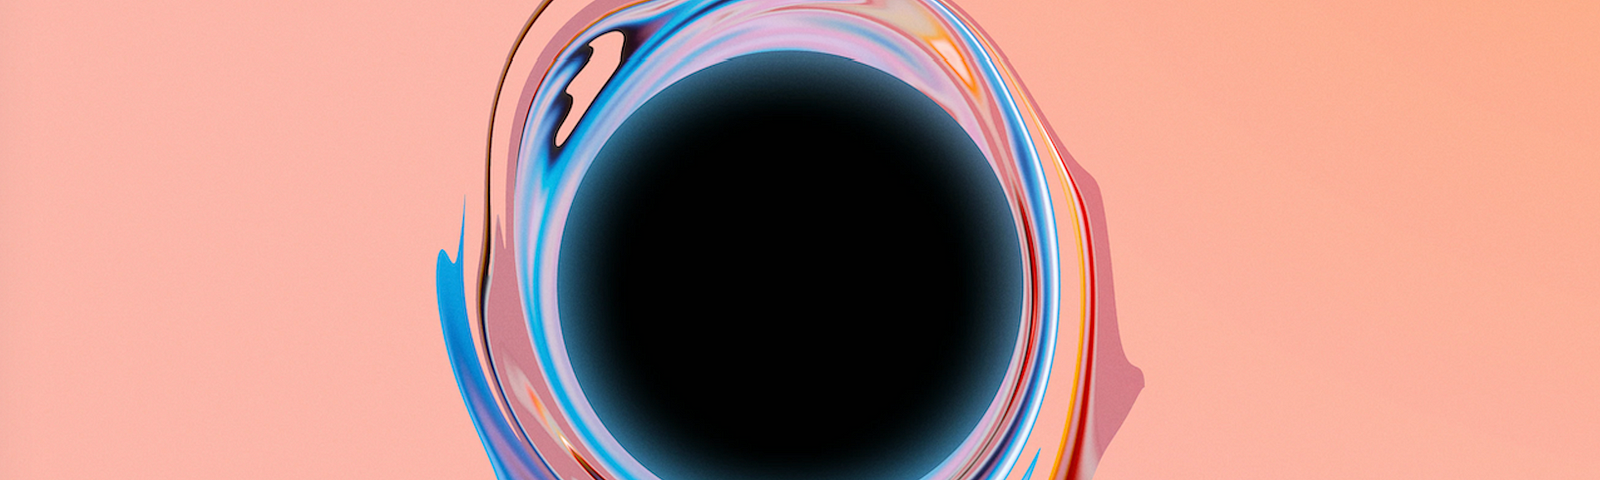 peach pink background with black circle in the middle. Blue, red, and peach blend together around the circle, like a vortex